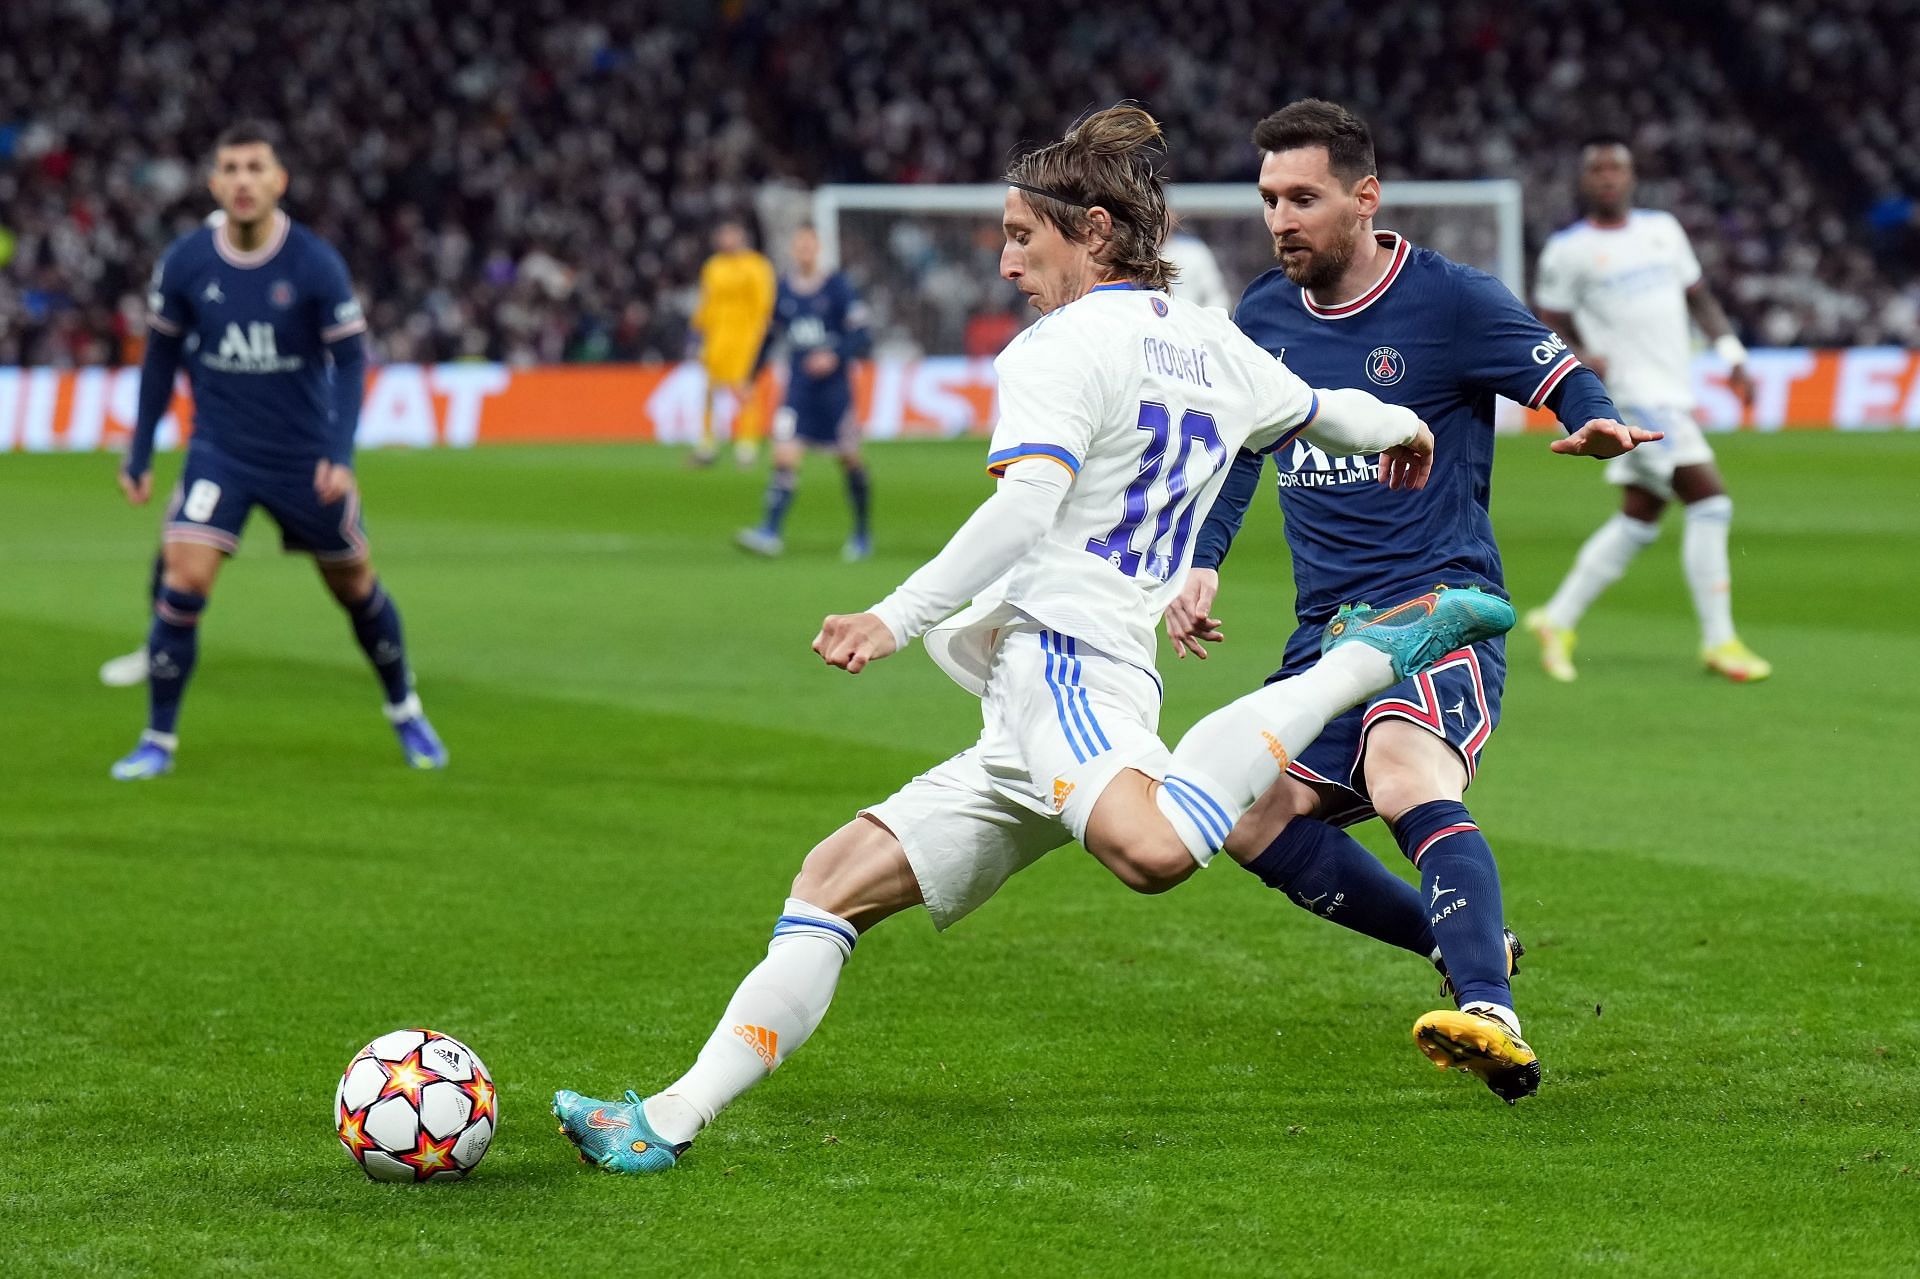 Luka Modric outplayed Lionel Messi when Real Madrid played PSG a few days ago.